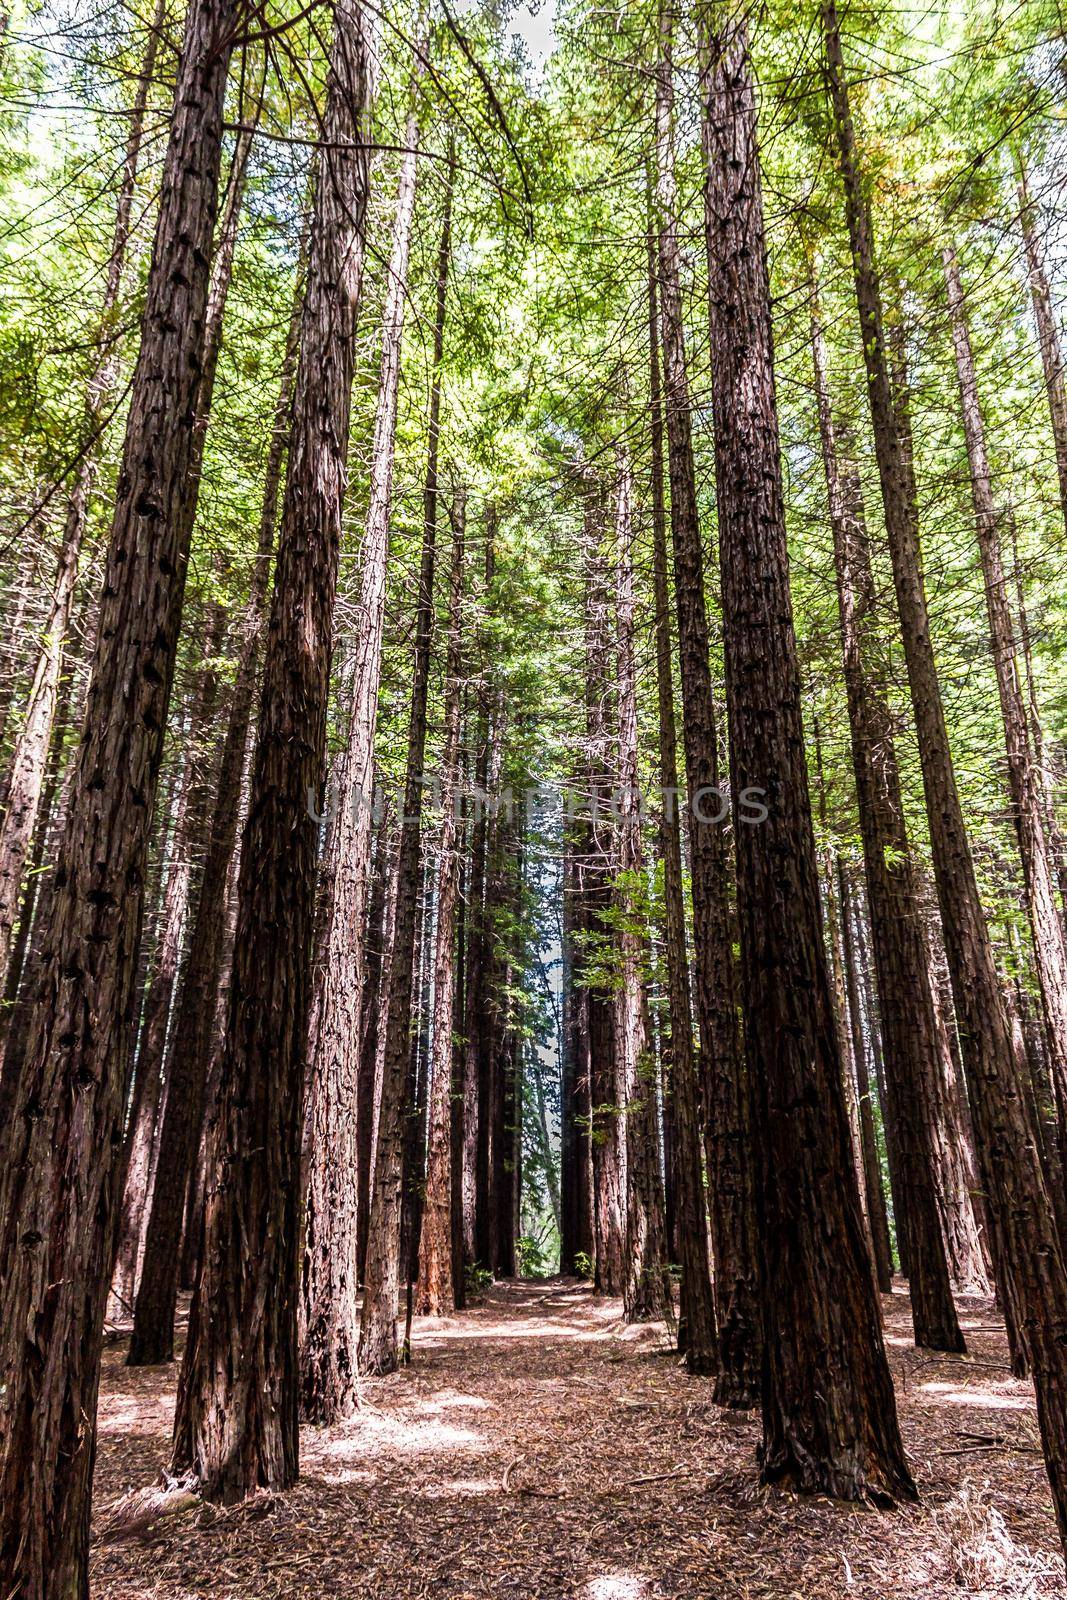 Rows of trees in Redwood Forest are a tourist icon for nature lovers and photography. Redwoods were planted in Warburton in the Yarra Valley in the 1930s. Melbourne, Australia by bettercallcurry